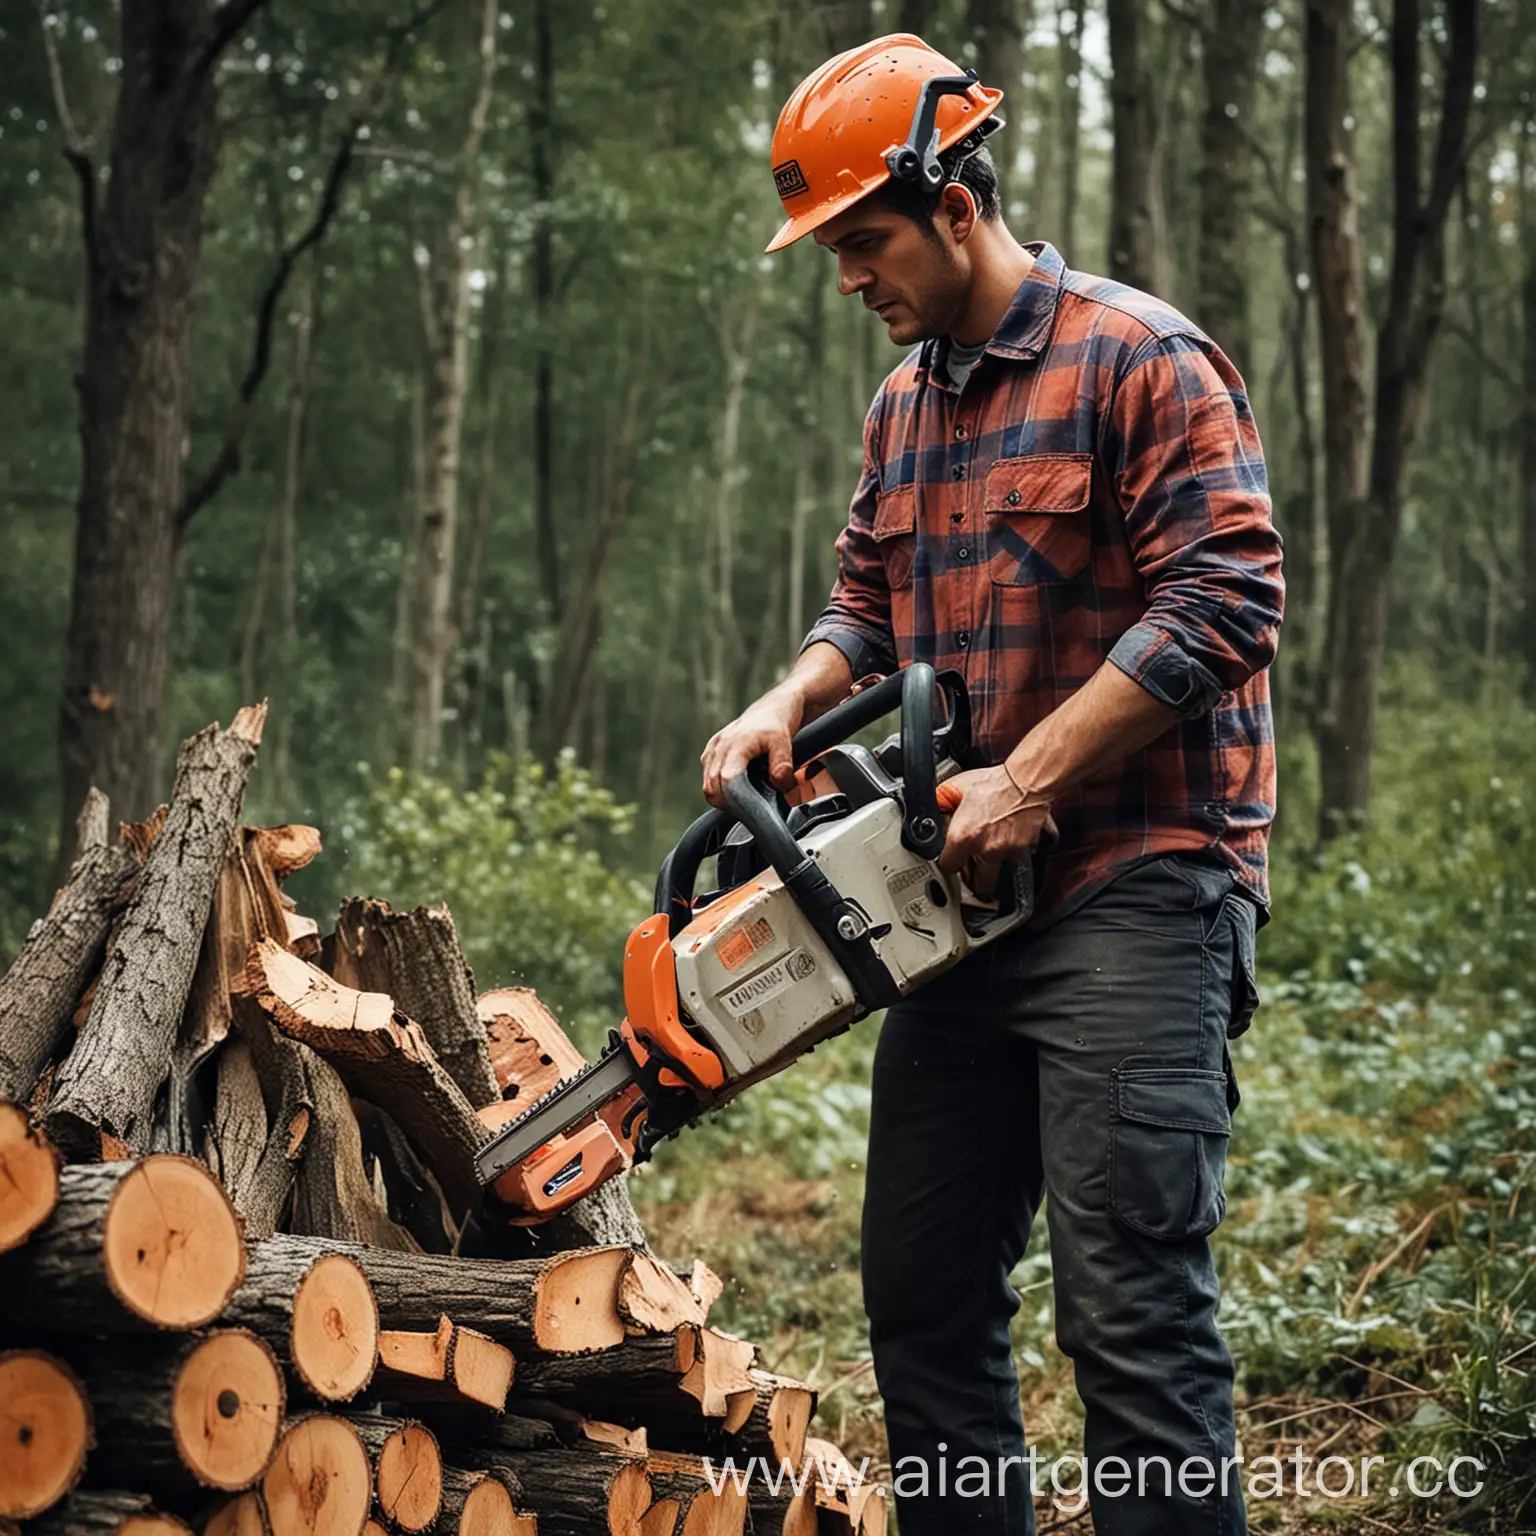 Man-Operating-Chainsaw-in-Forest-Clearing